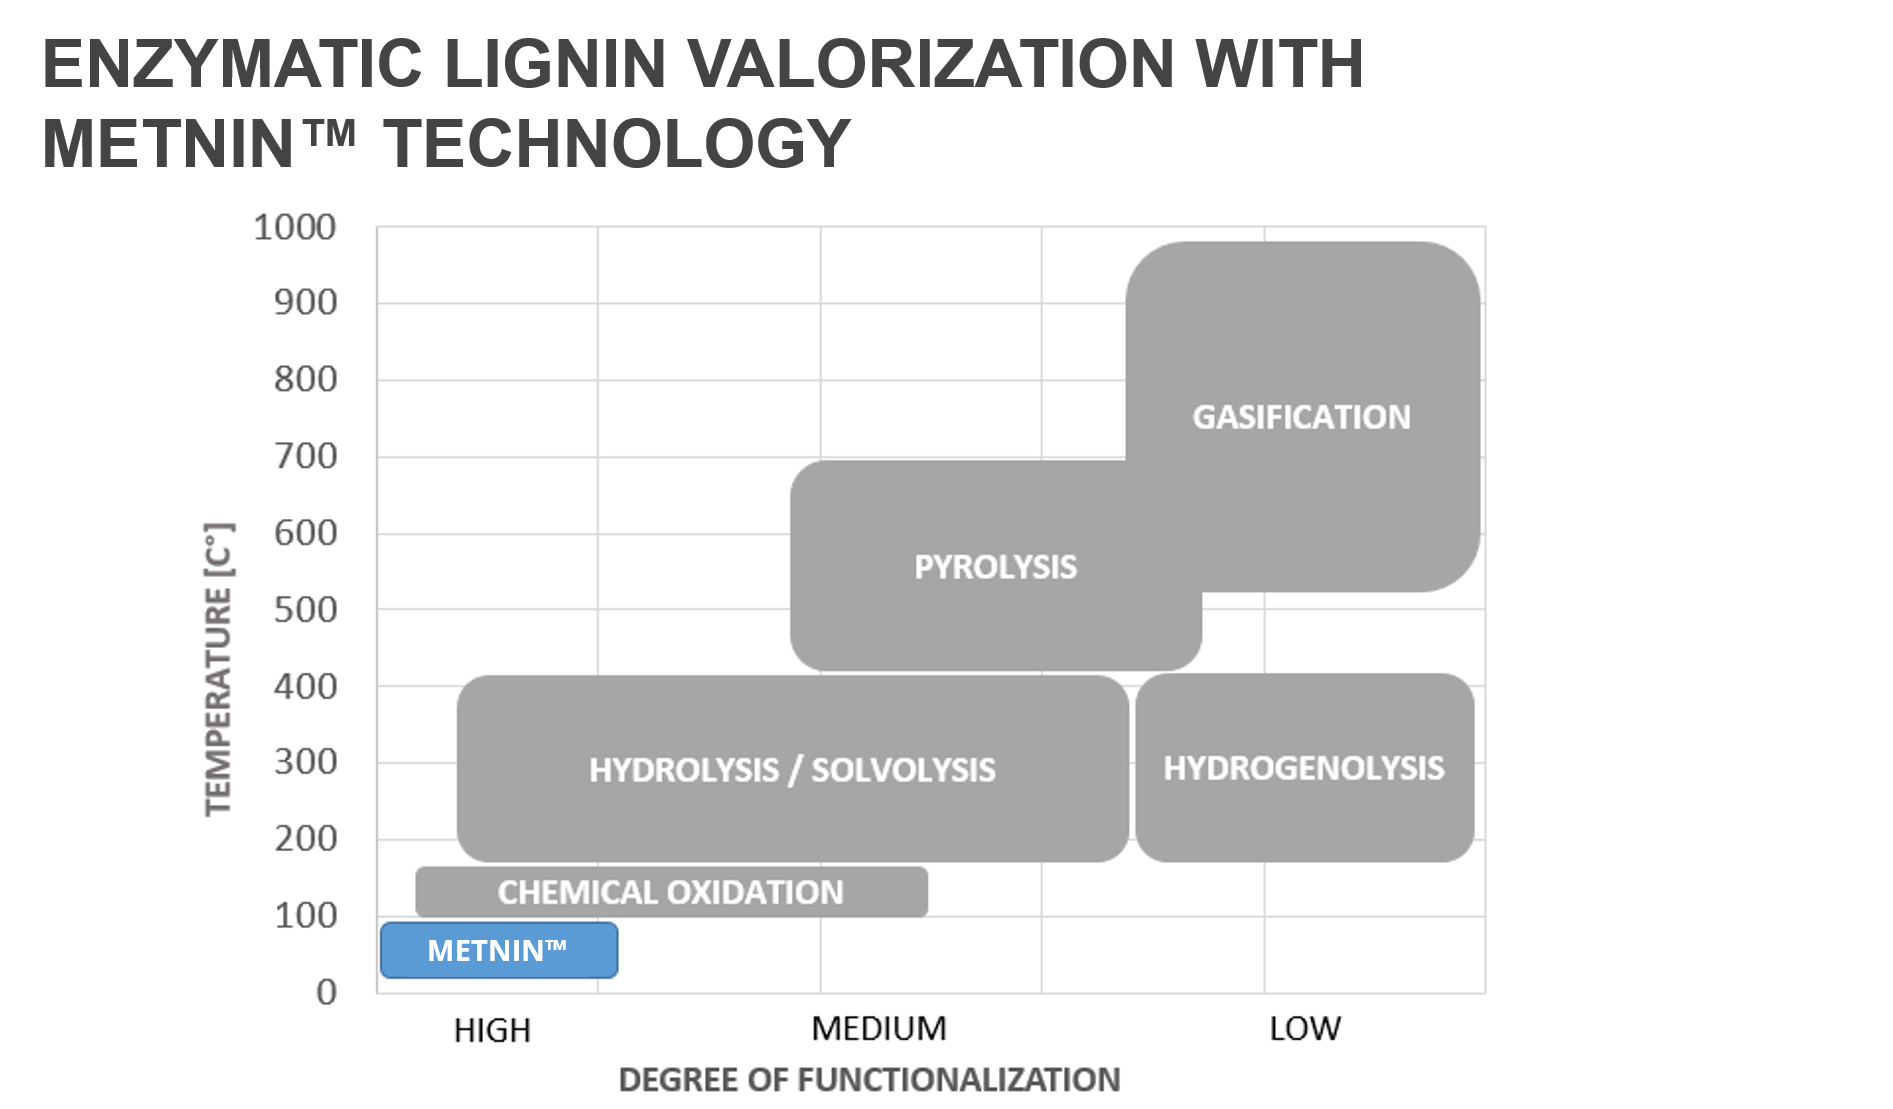 METNIN™ TECHNOLOGY IS A LIGNIN REFINERY - SUSTAINABLE PATH TO REPLACE OLD BASED CHEMISTRY IN HIGH VALUE END USER PRODUCTS